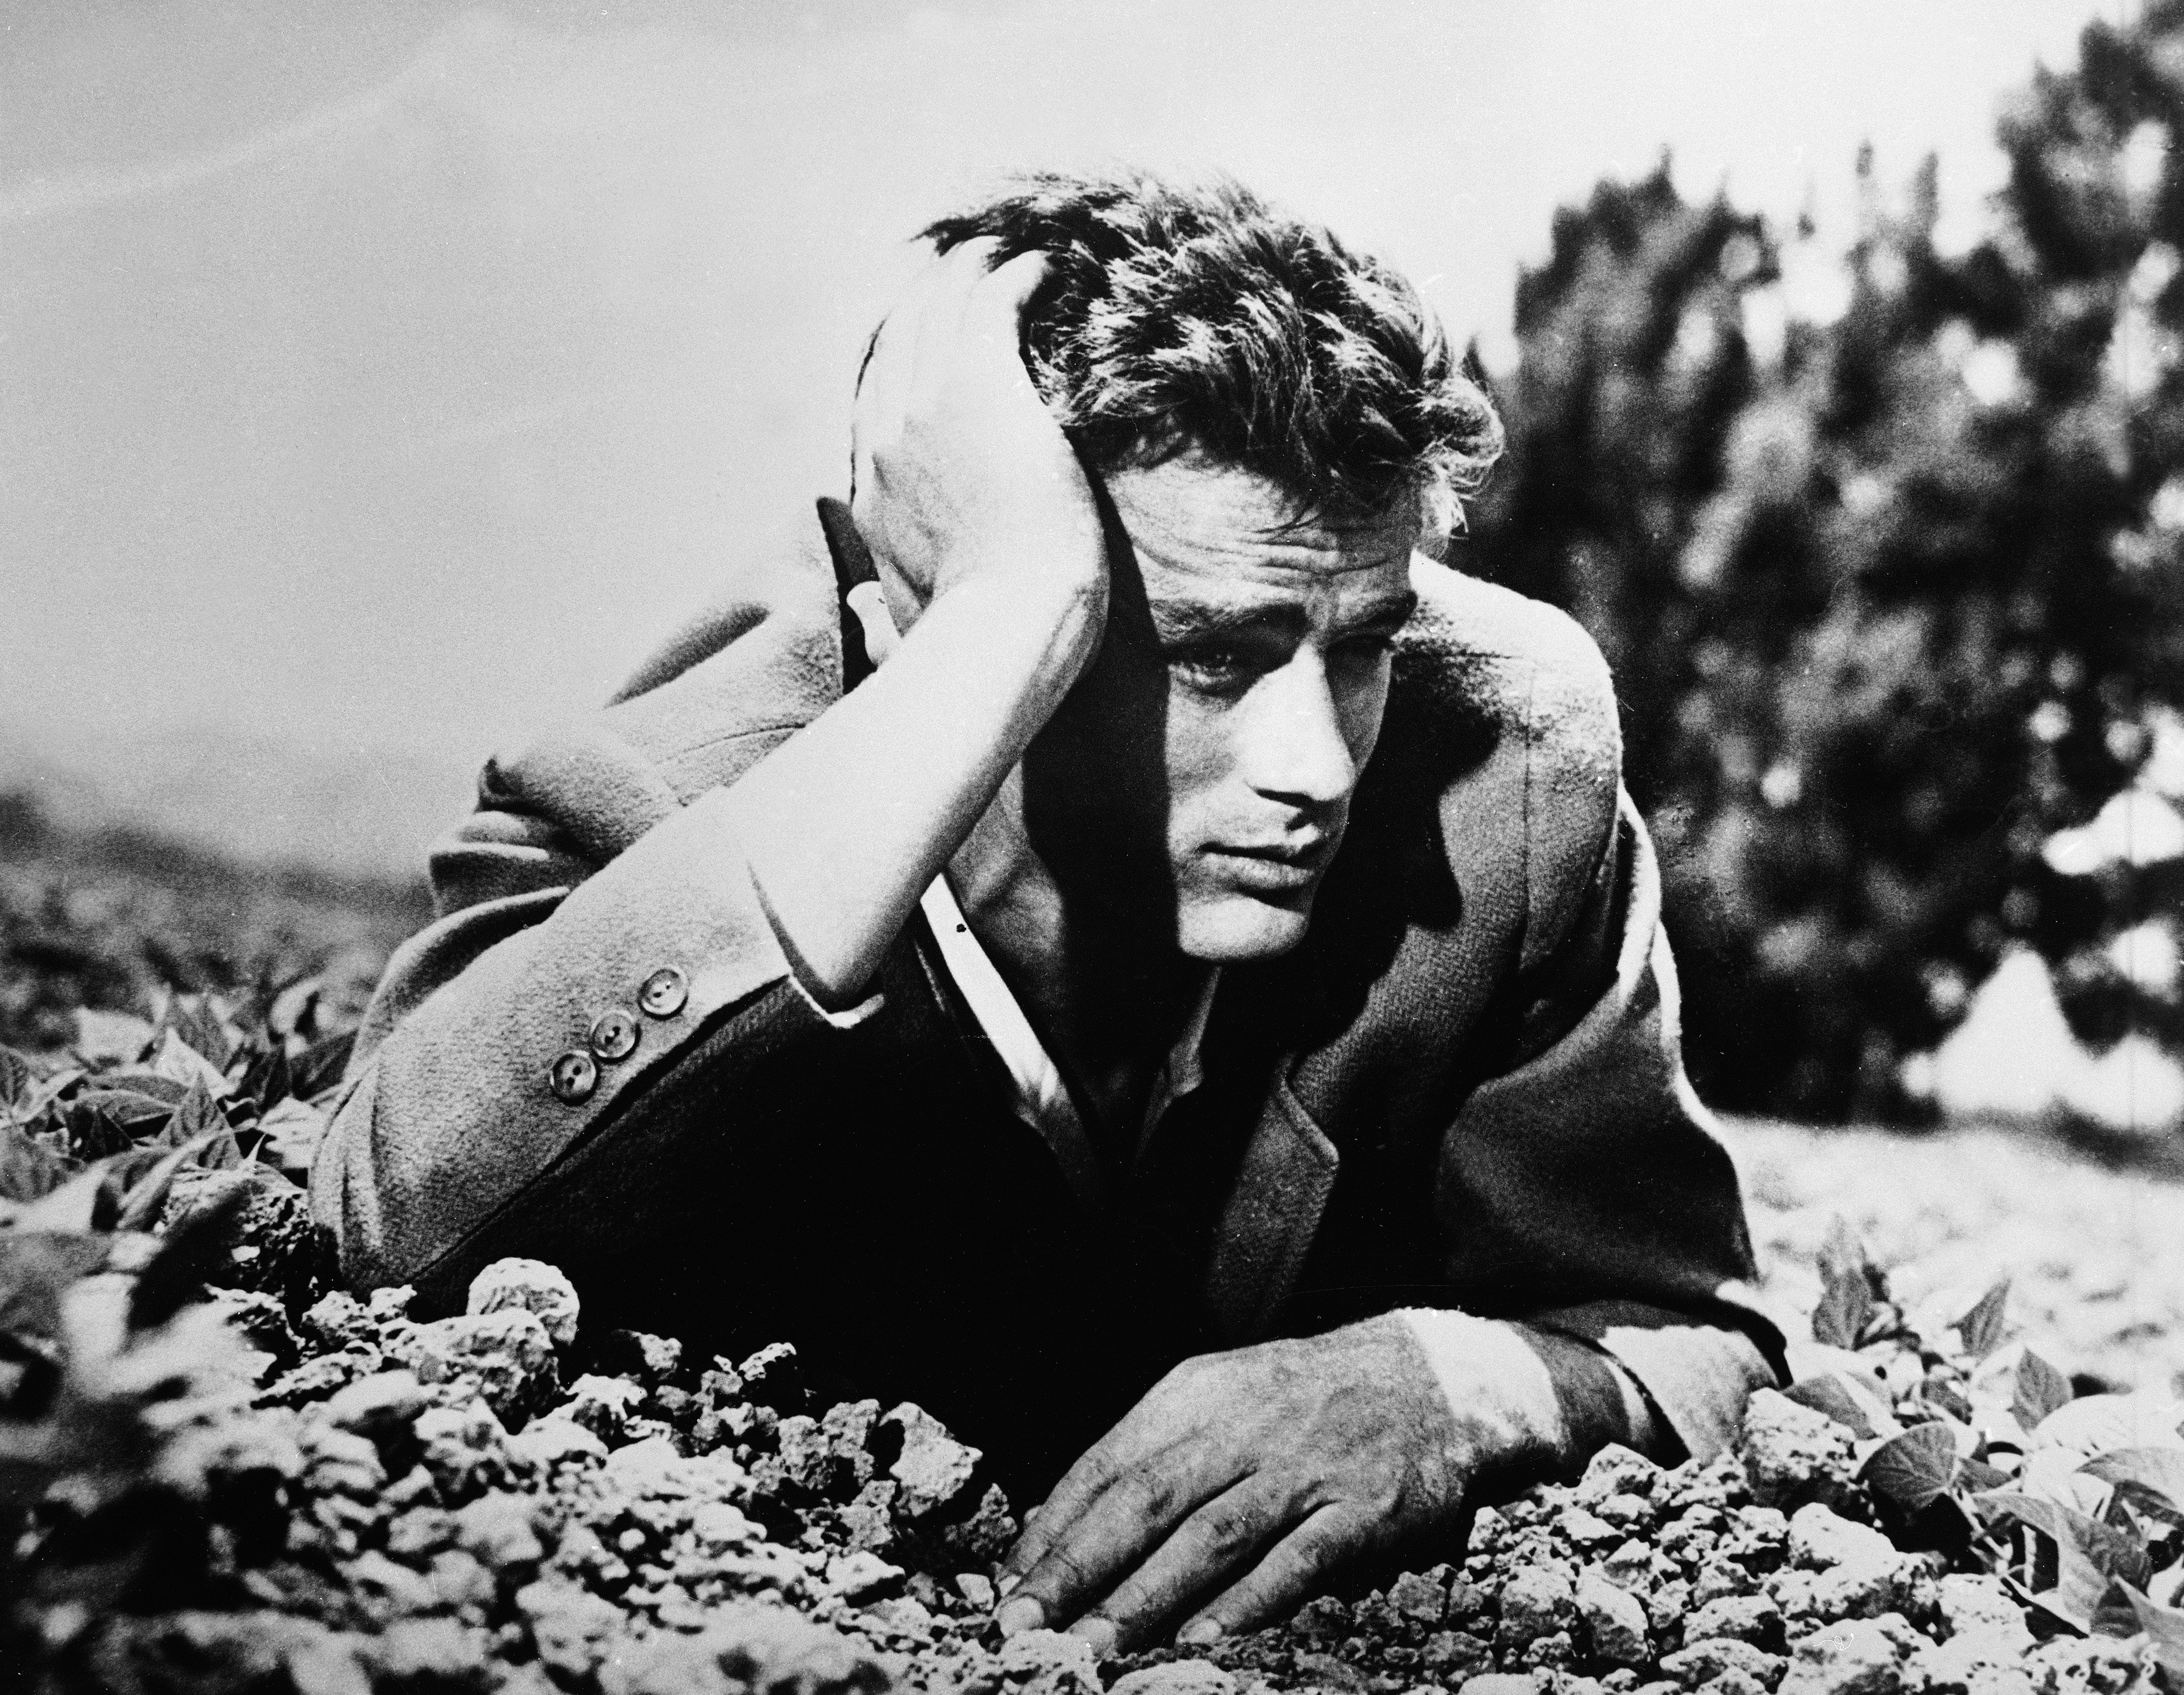 American actor James Dean (1931 - 1955) lies in the dirt with his head leaning on his hand, 1950s.